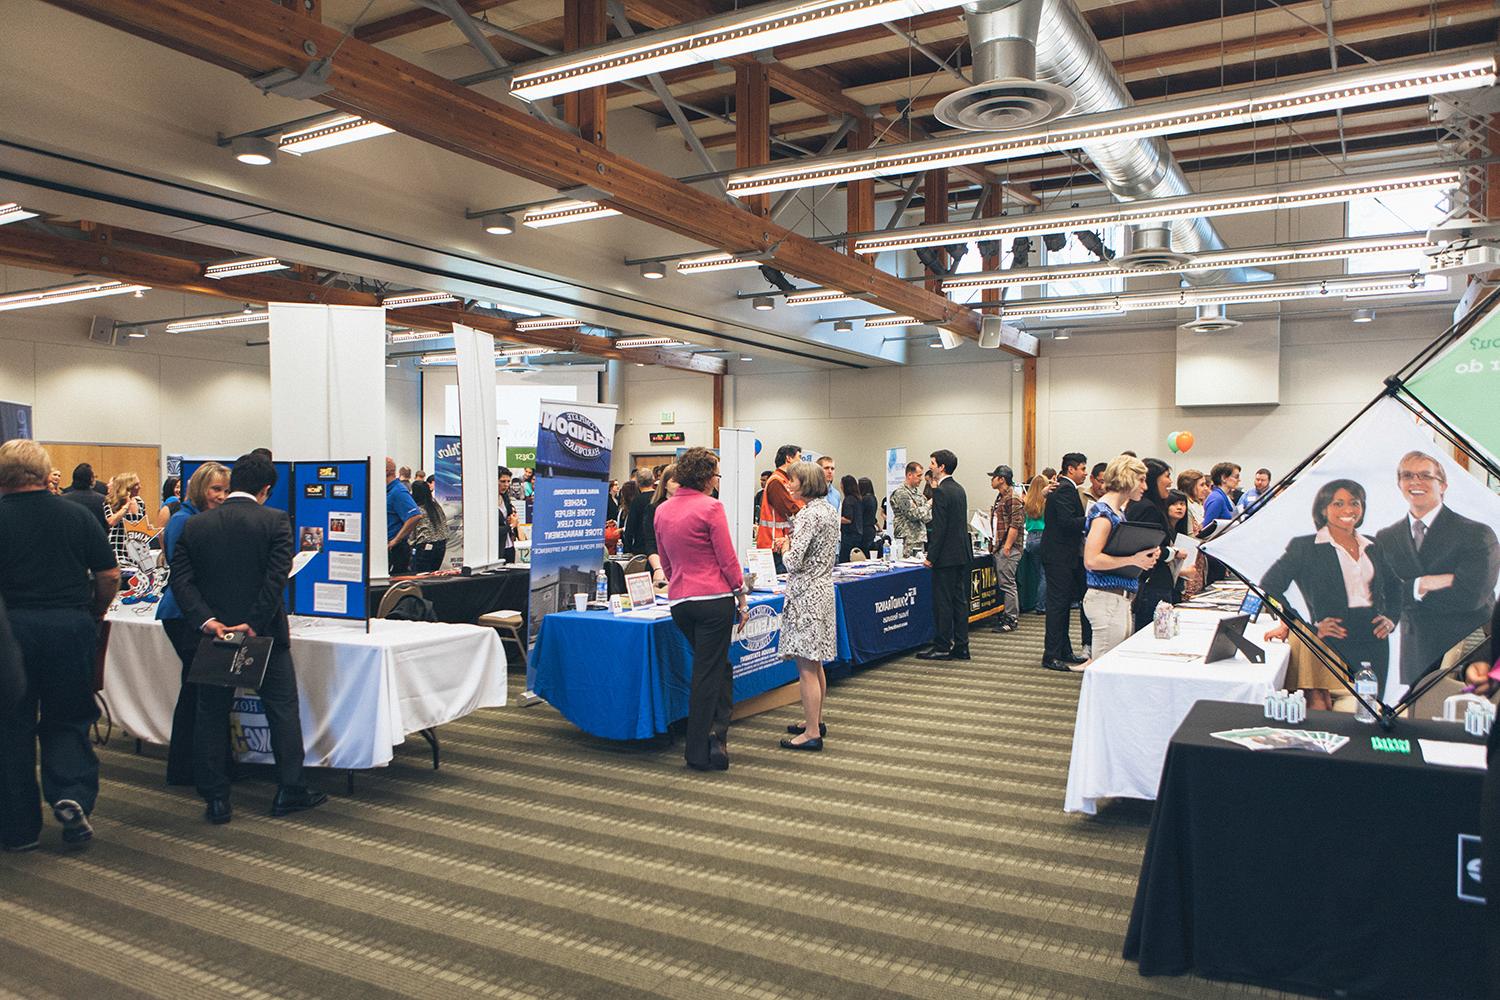 A networking event is held in Upper Gwinn